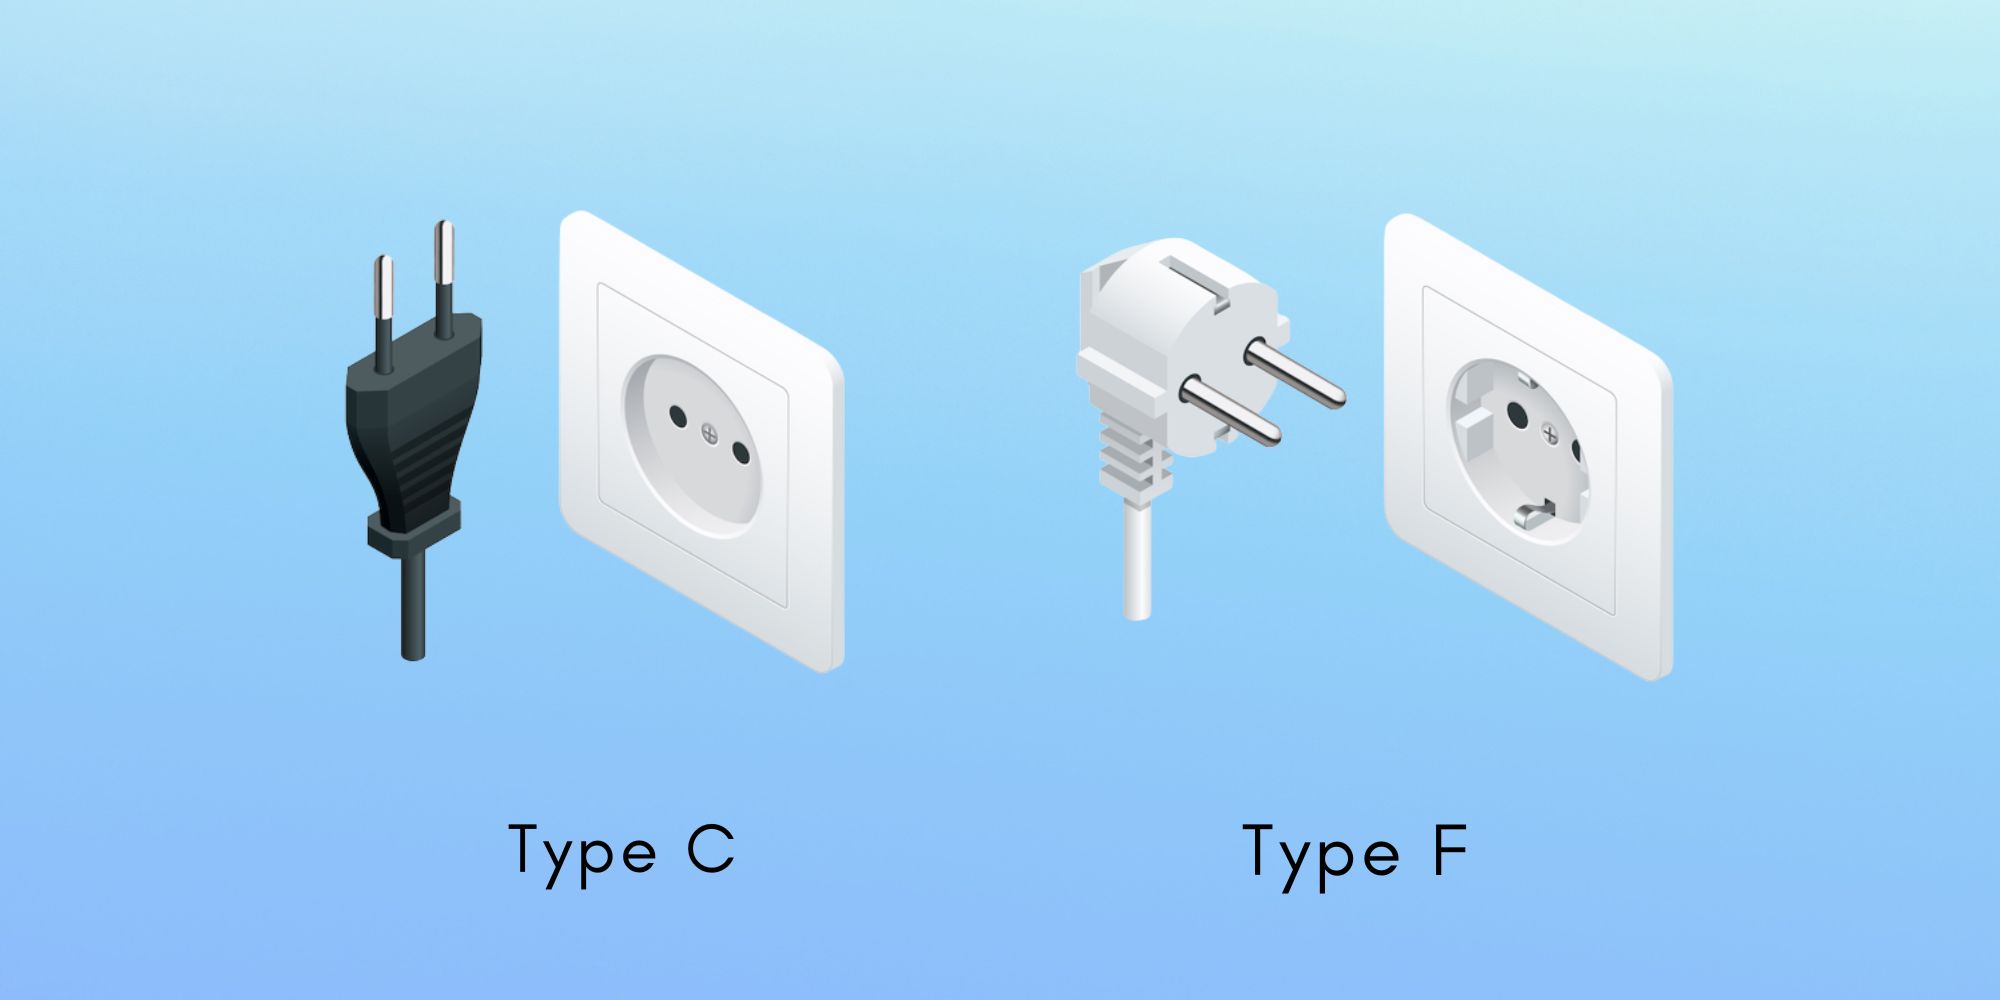 Norway Power Plugs and Sockets: Type C and Type F
